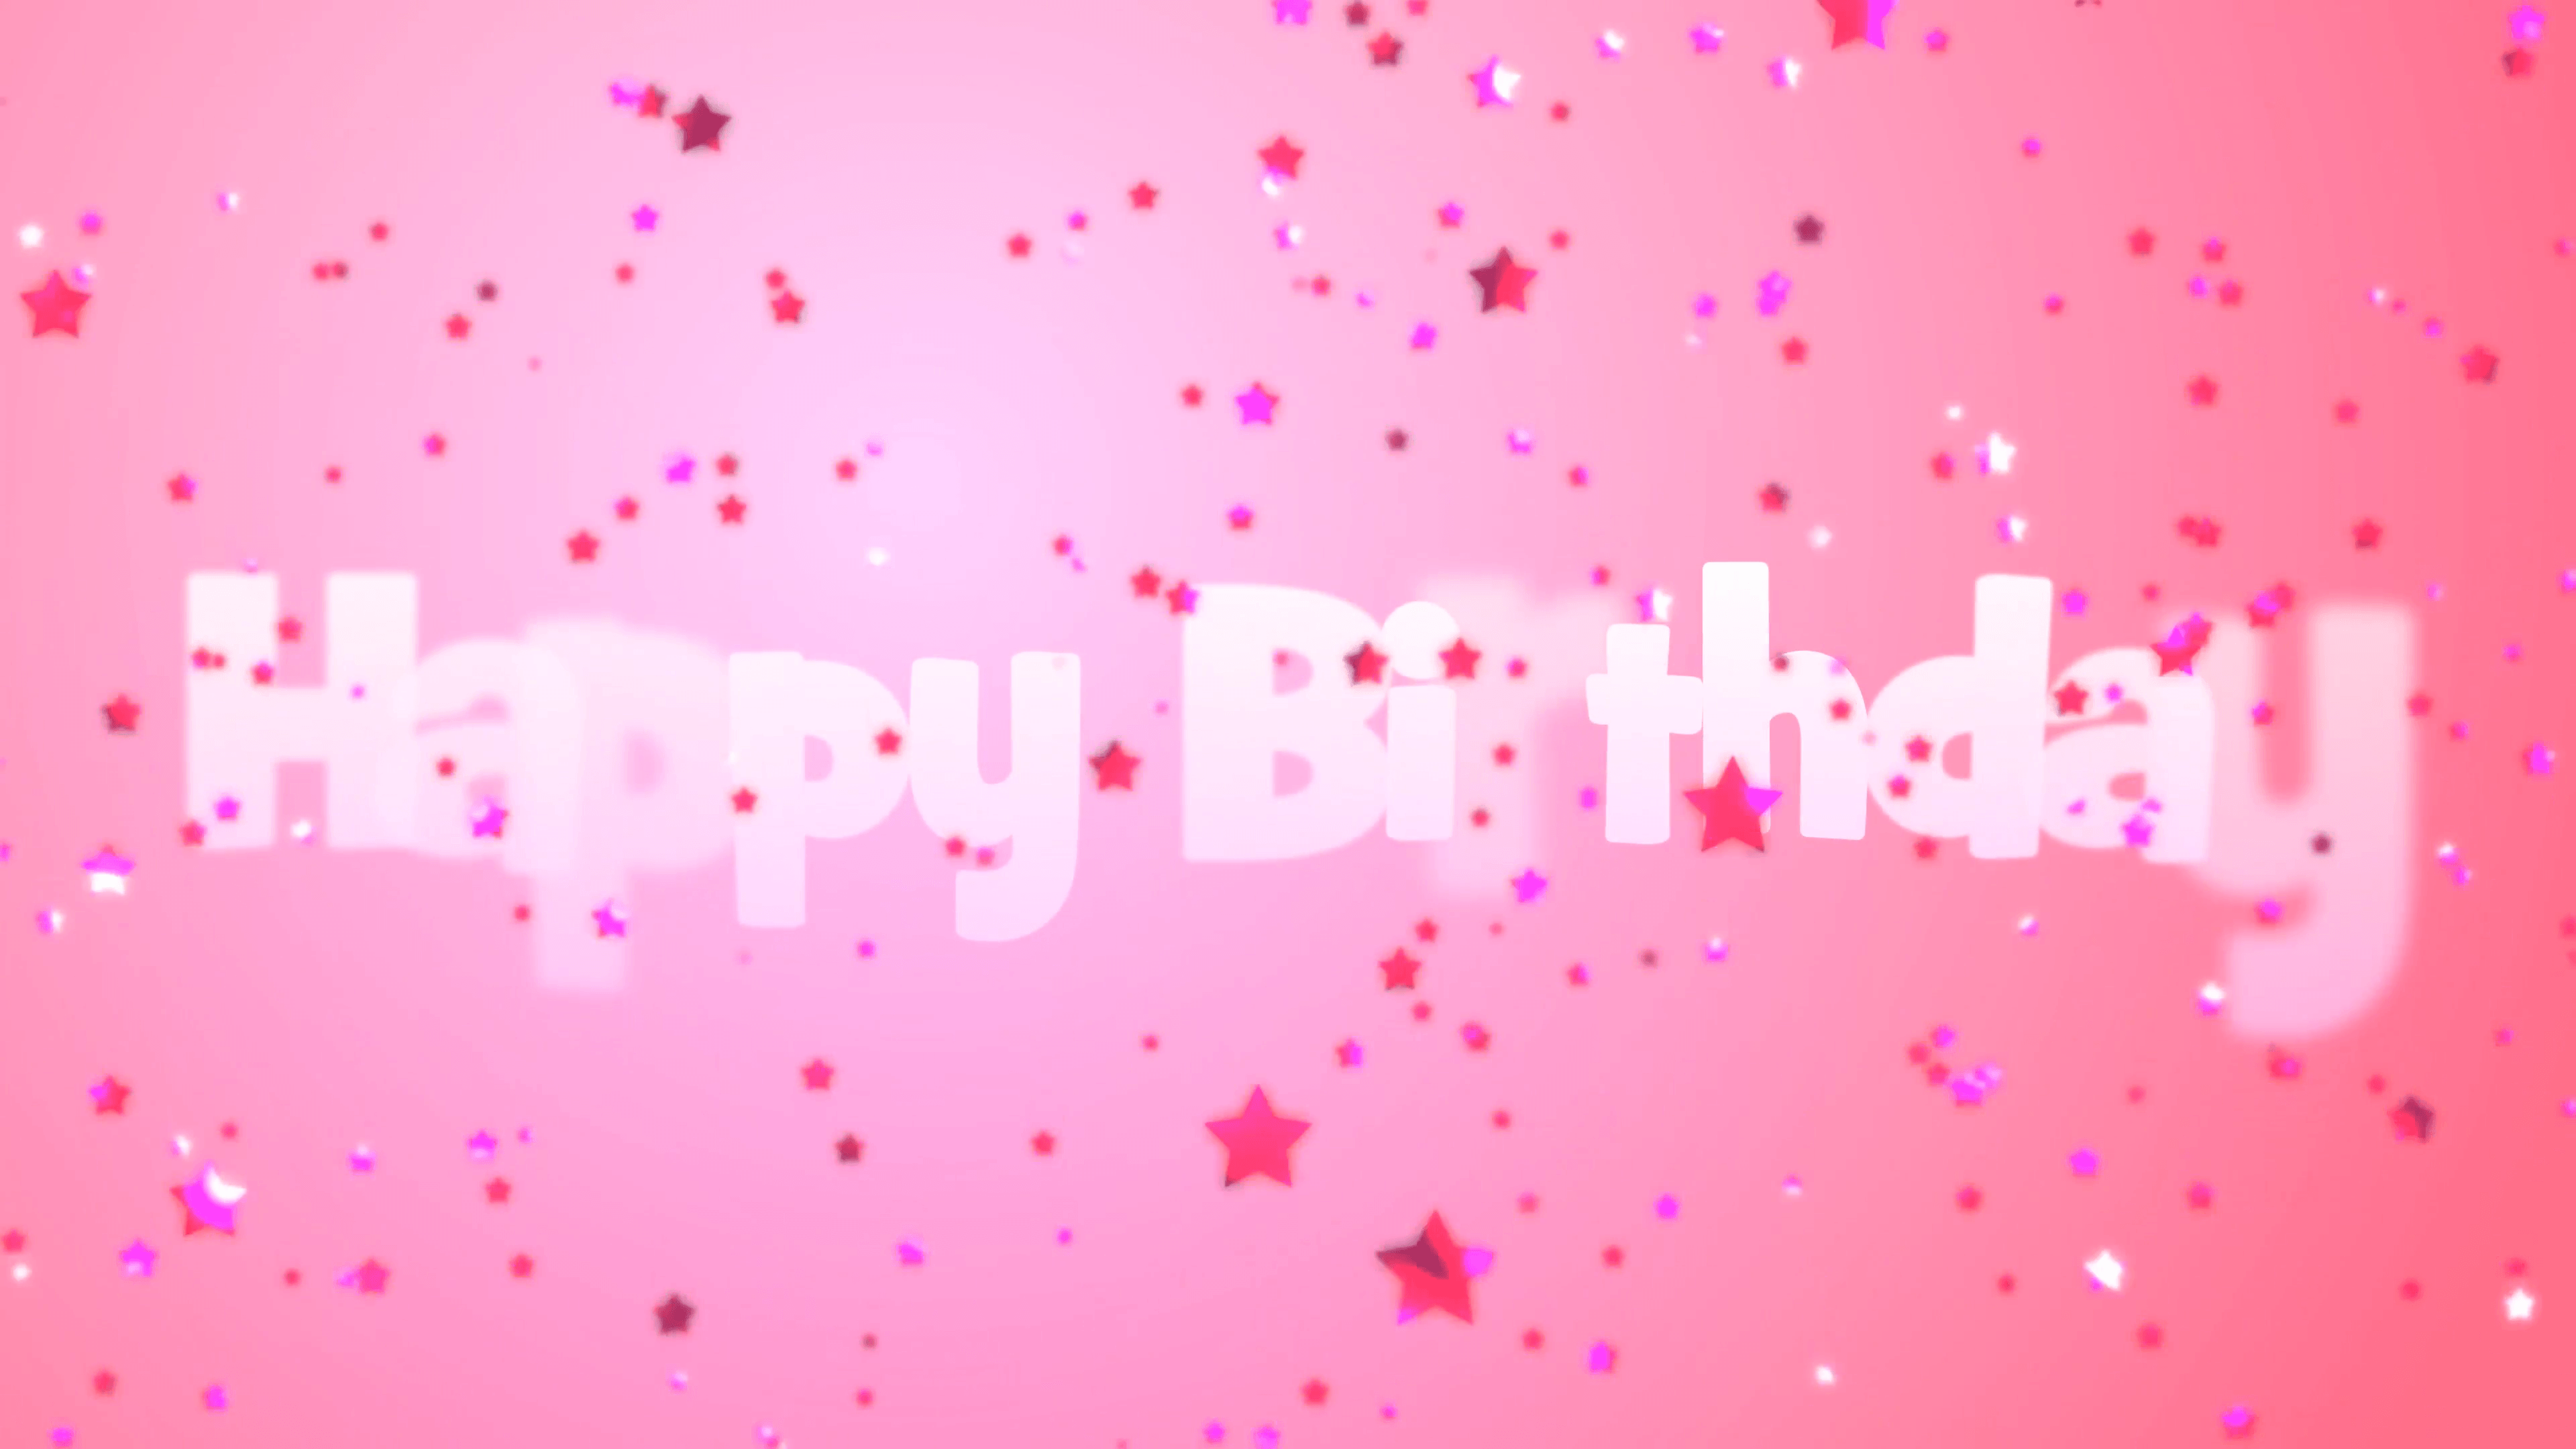 Happy Birthday message with pink falling stars on a pink background